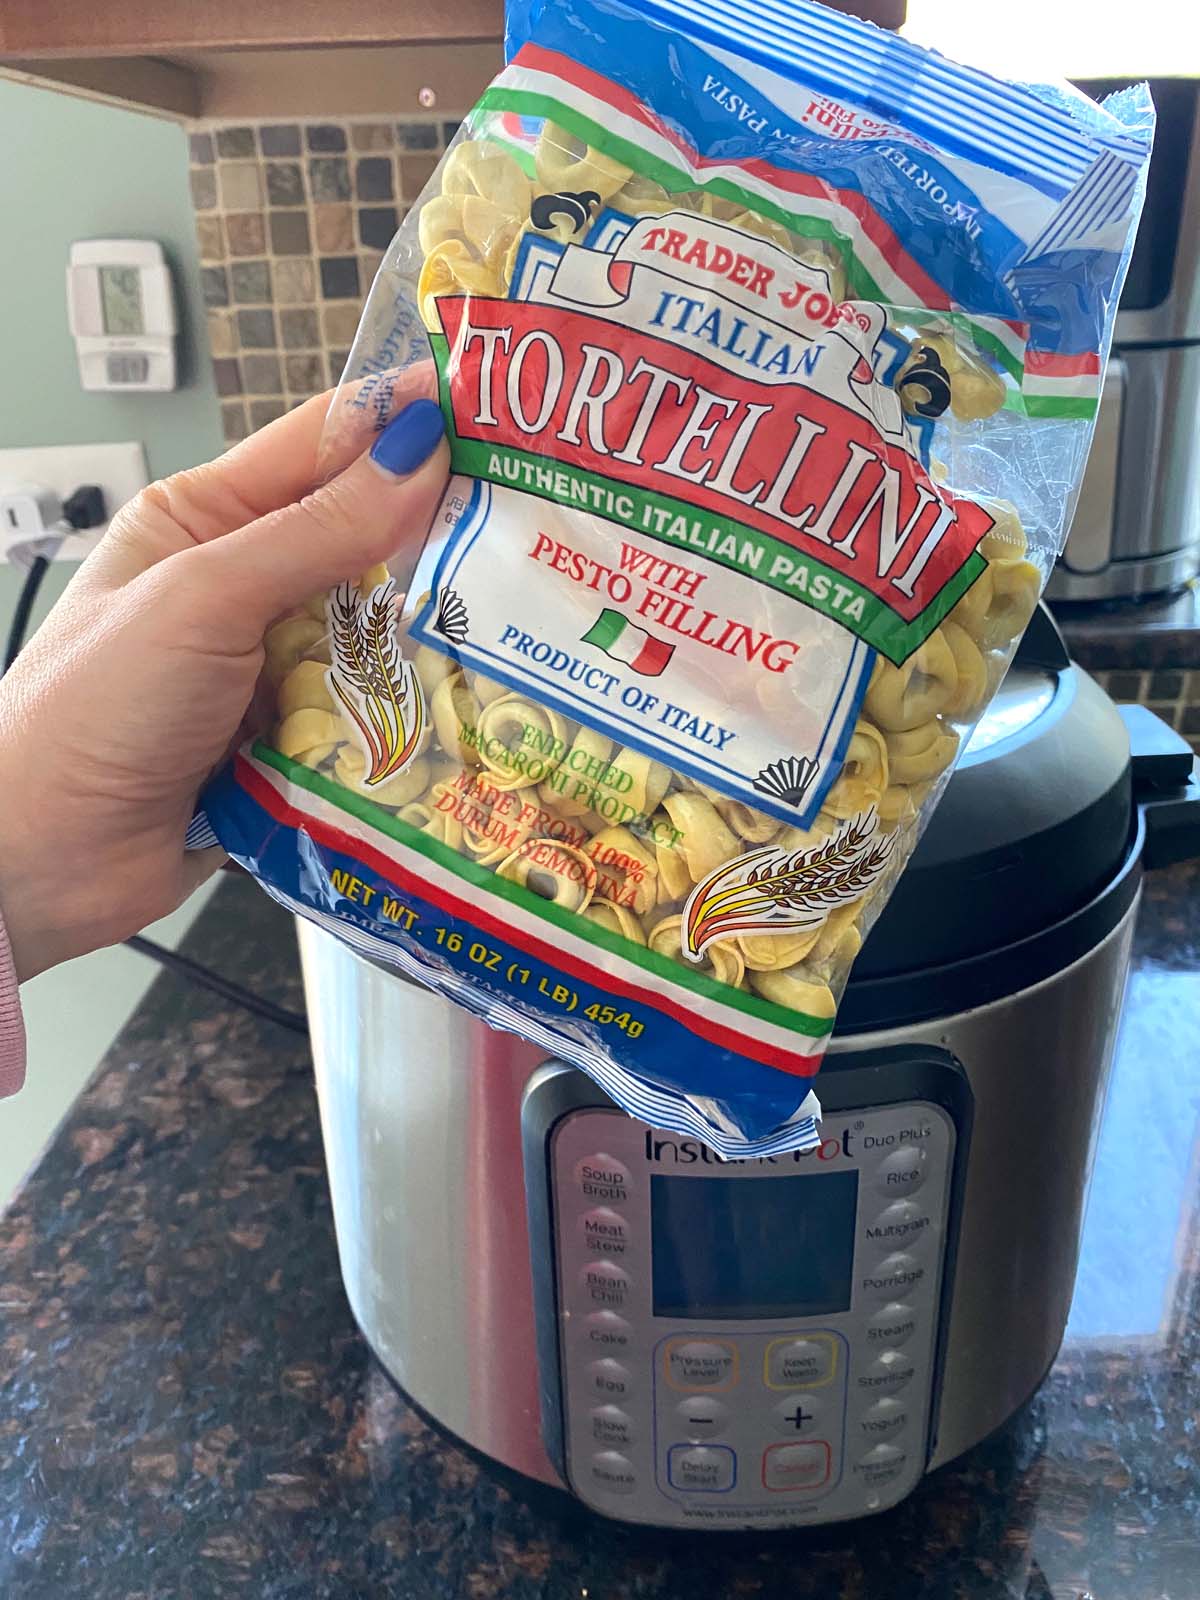 A bag of dried tortellini being held up in front of an instant pot.